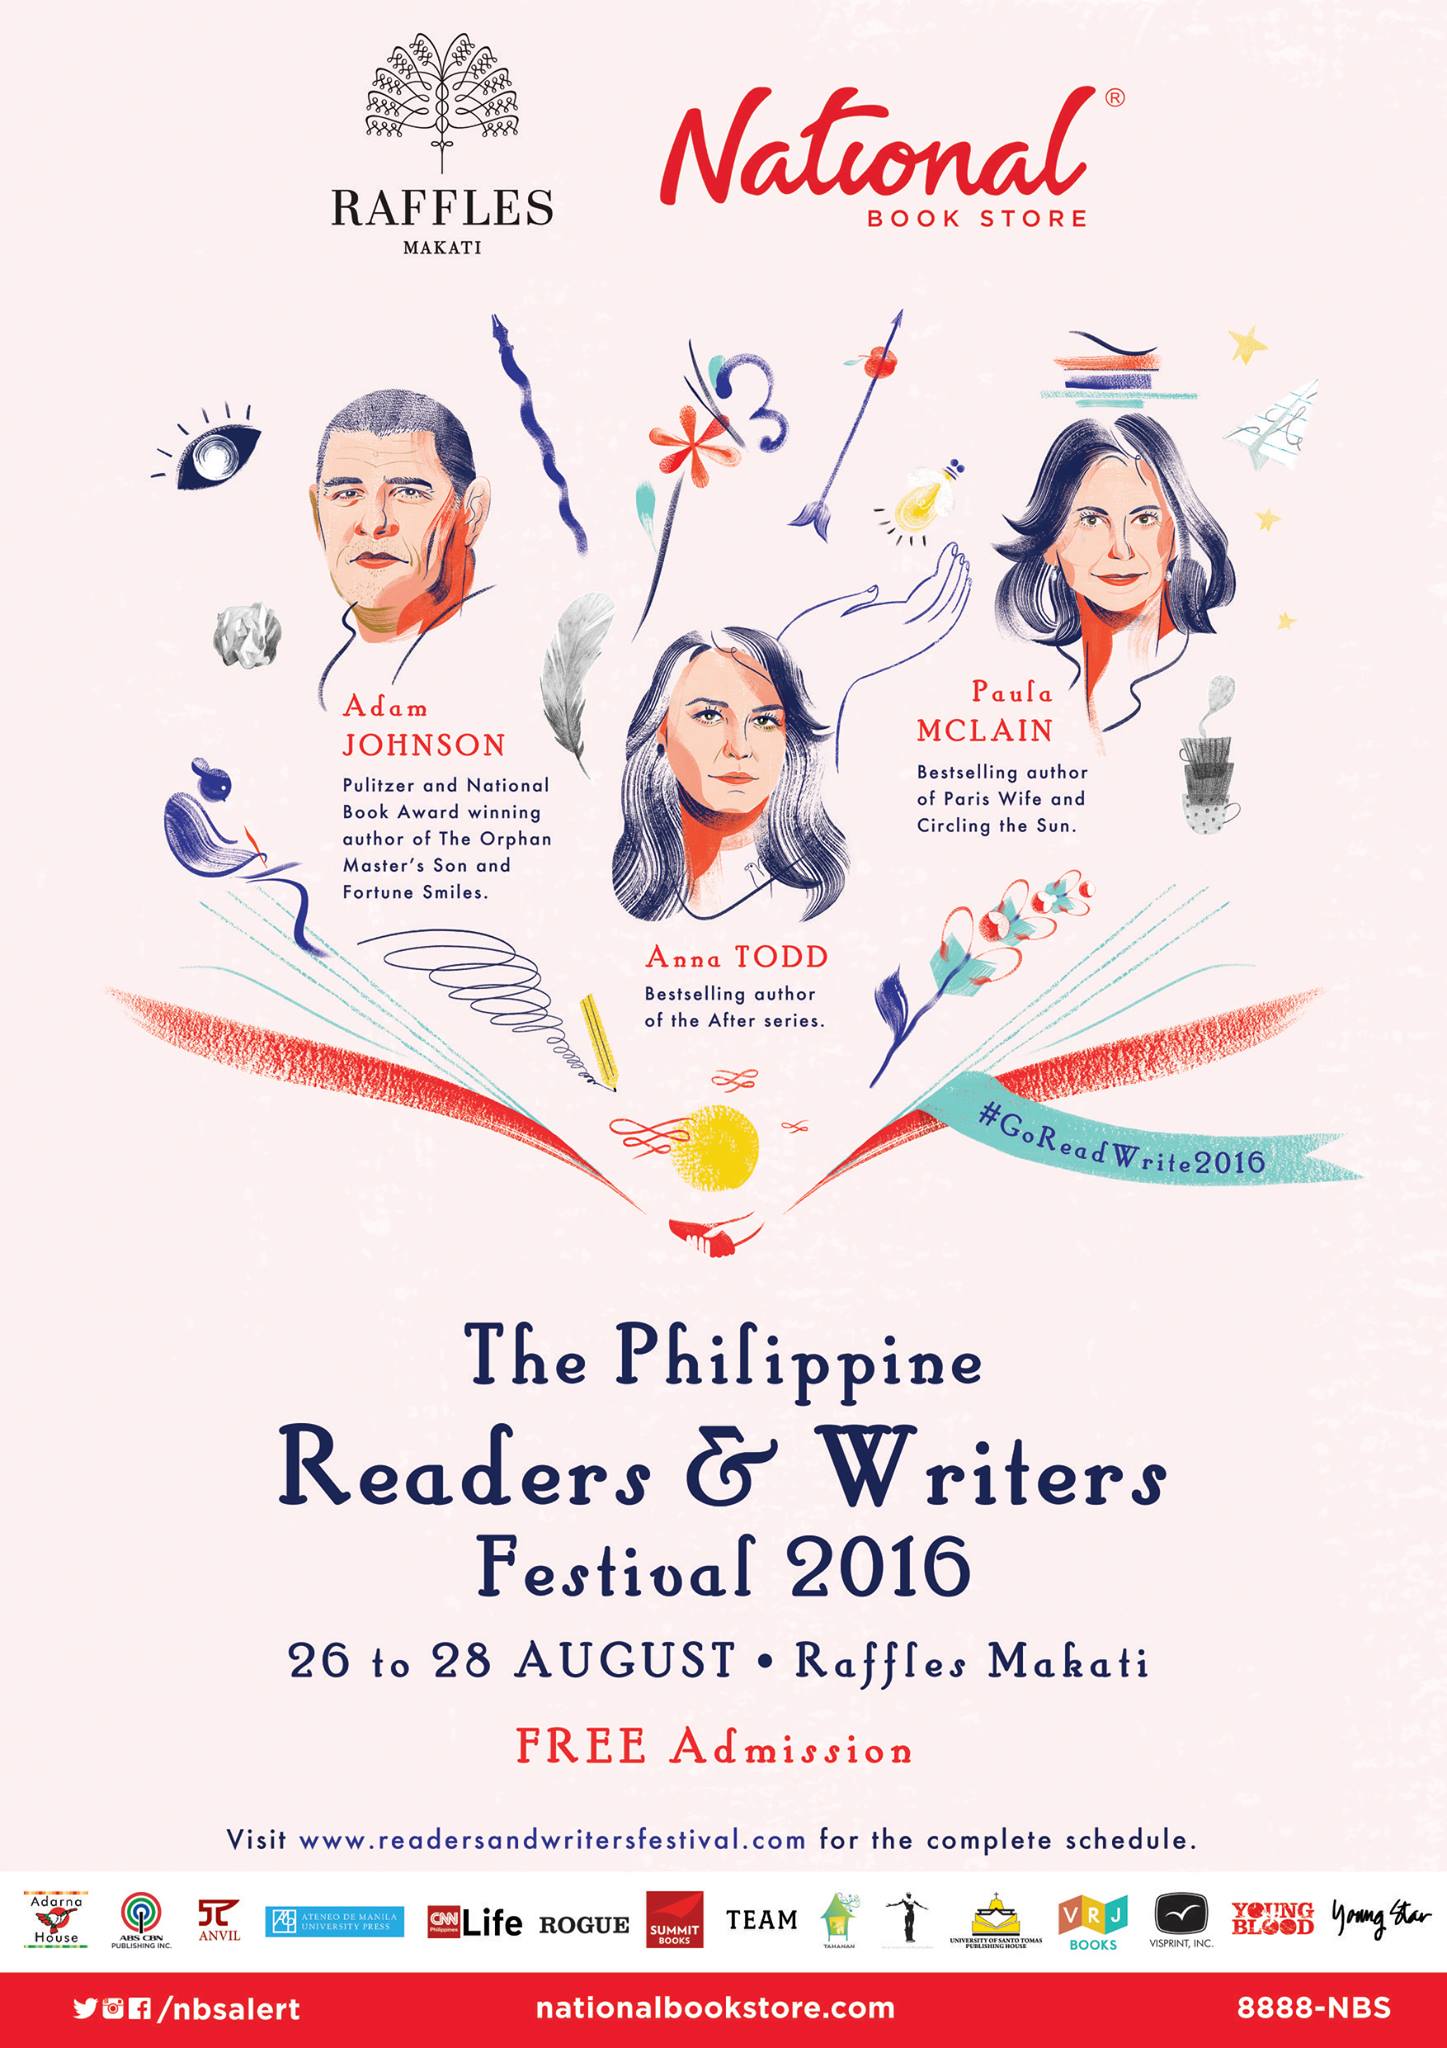 The Philippine Readers and Writers Festival